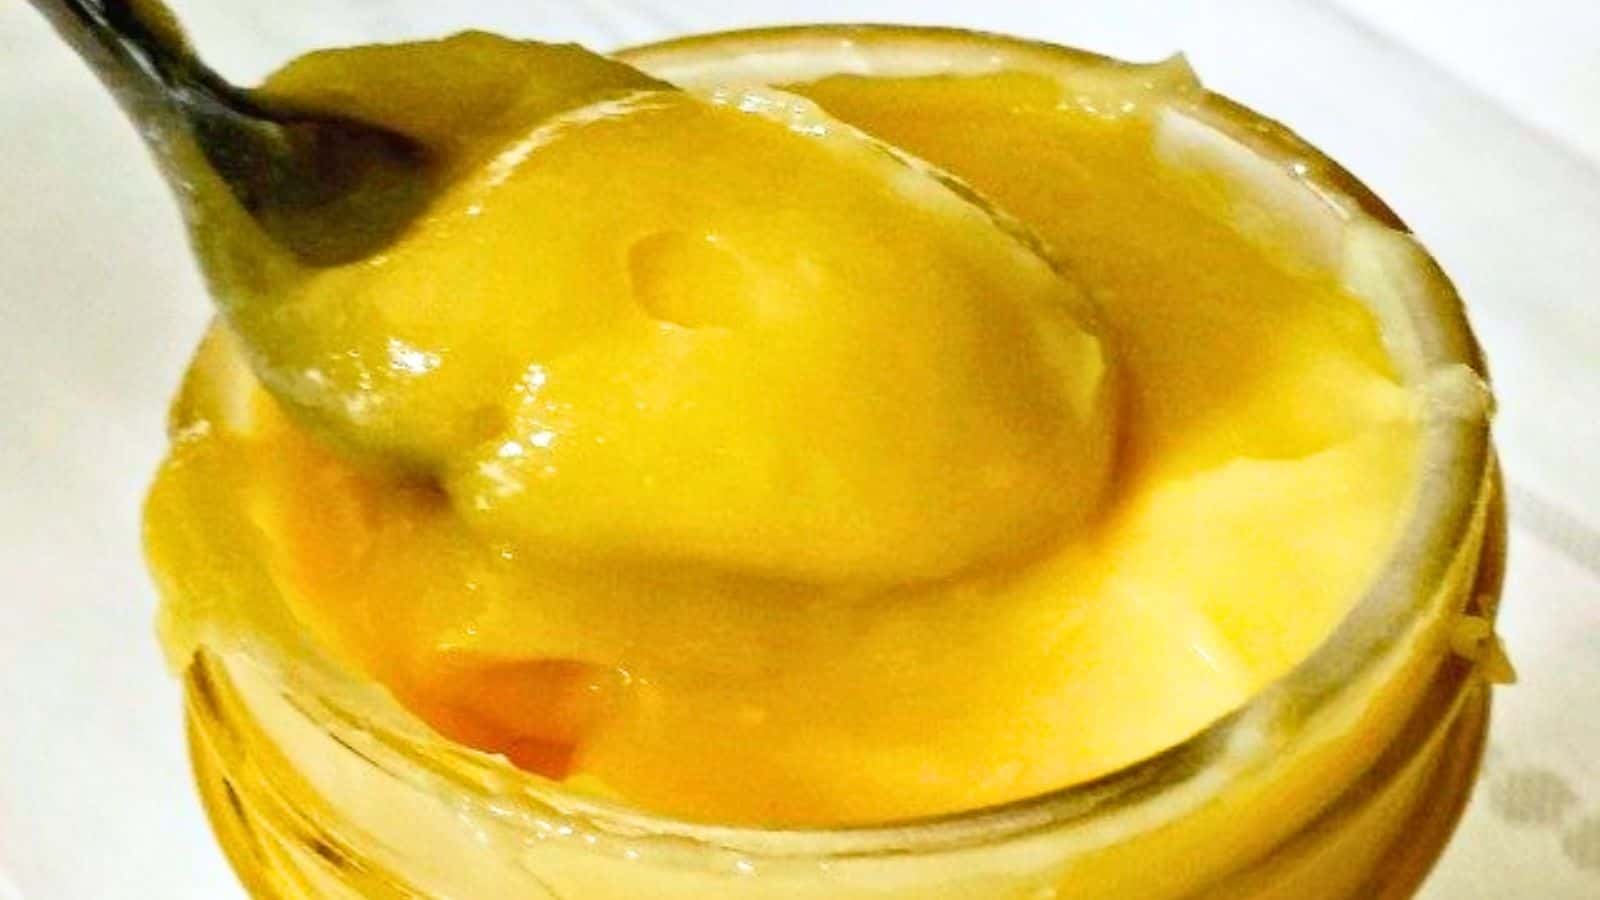 Image shows a spoon dipping into a jar of Lemon Curd.